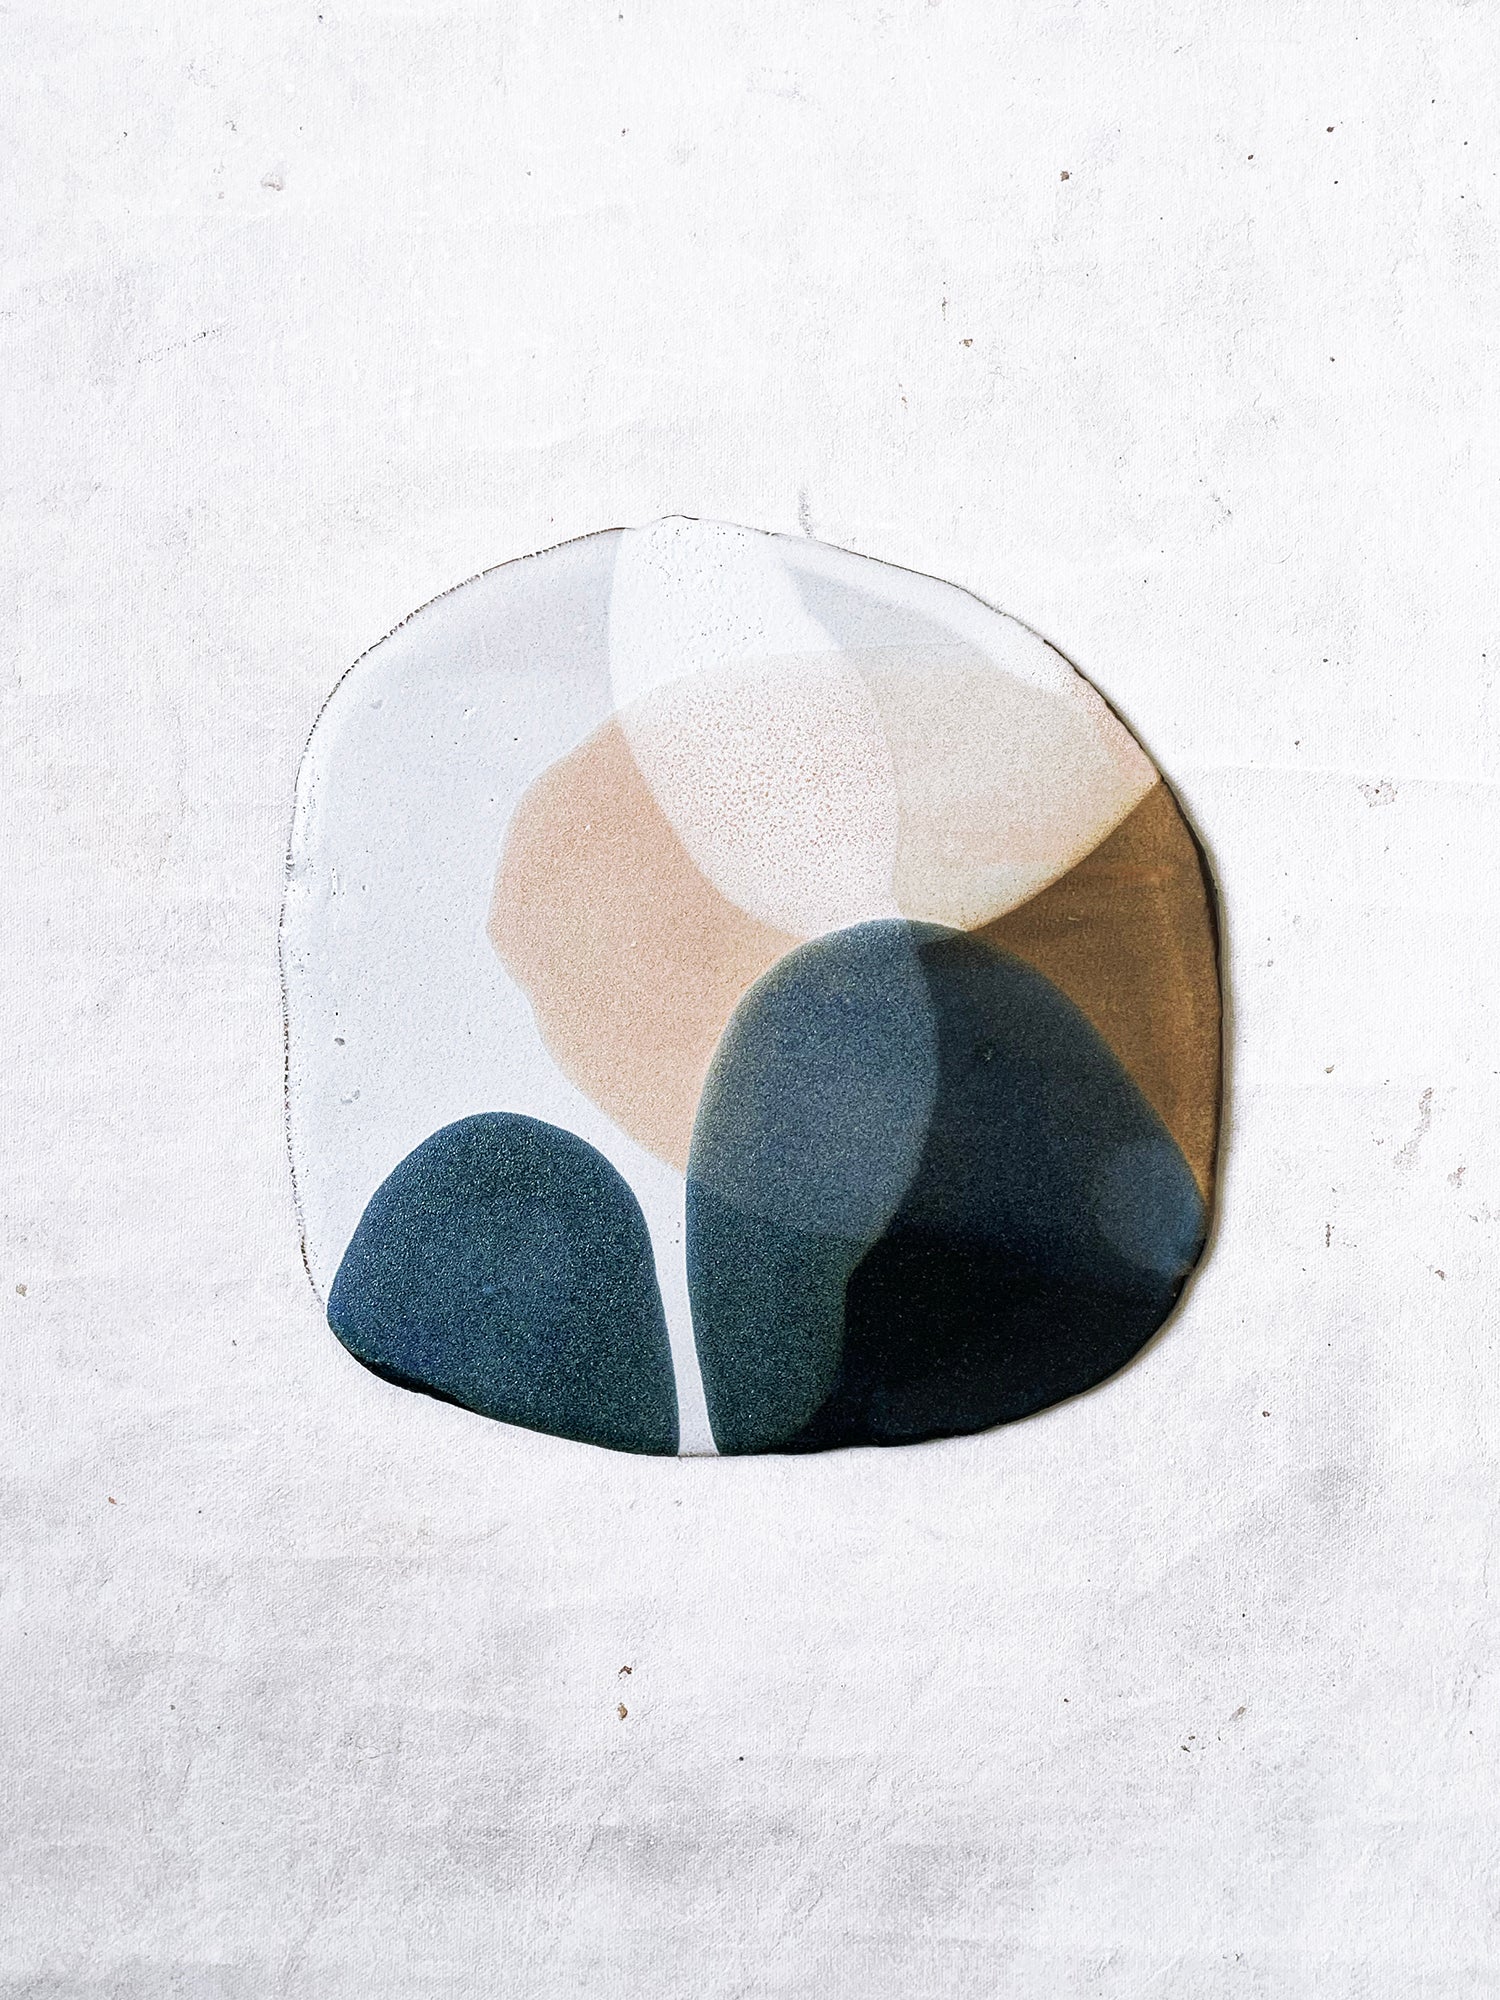 "Composition in Oval III"